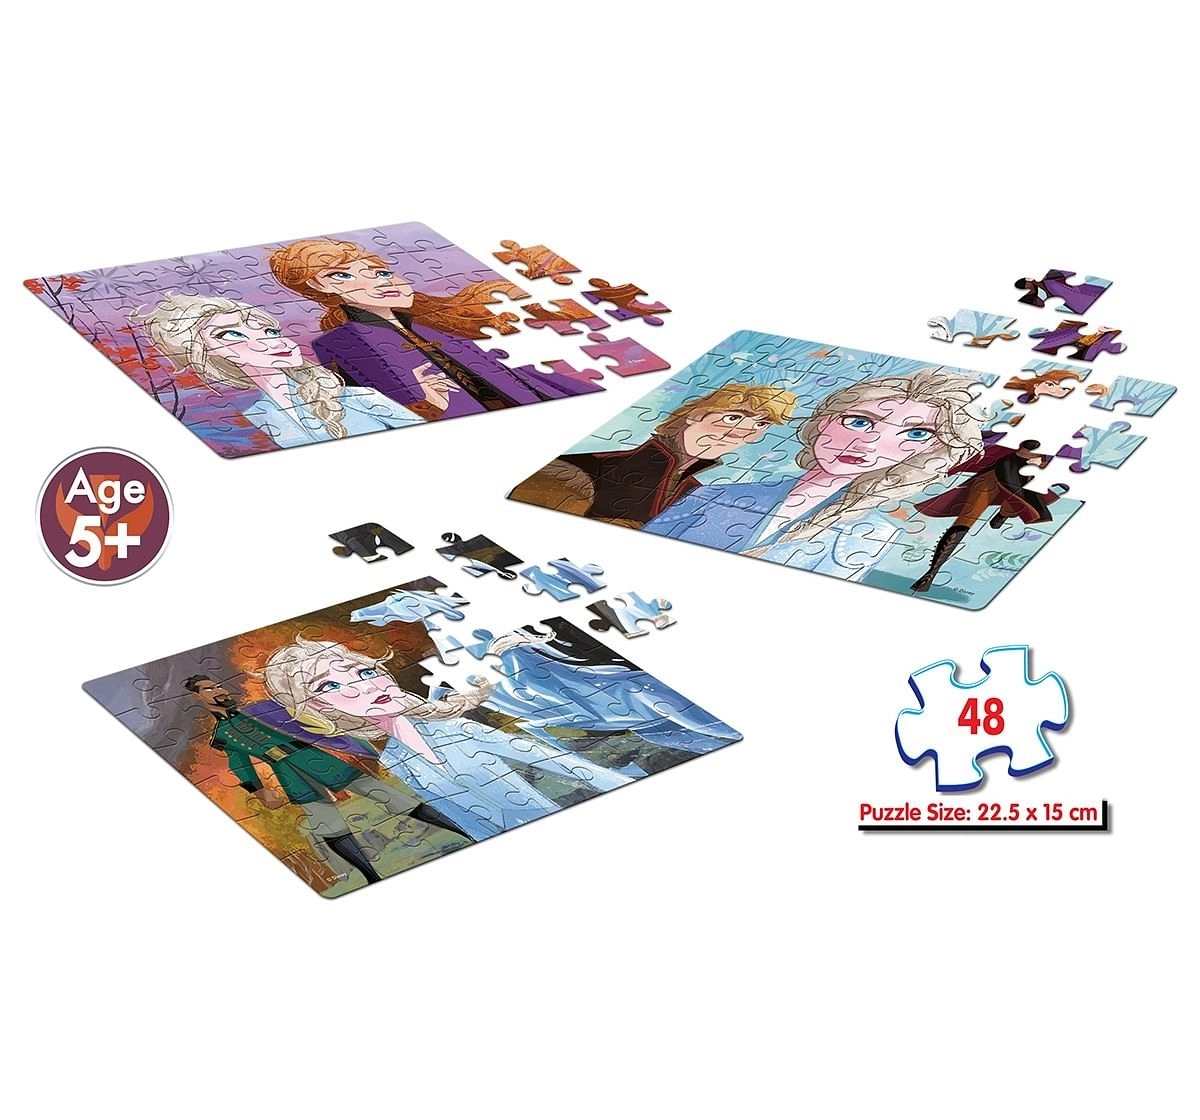 Frank Frozen II 3 In 1 Puzzles for Kids age 5Y+ 